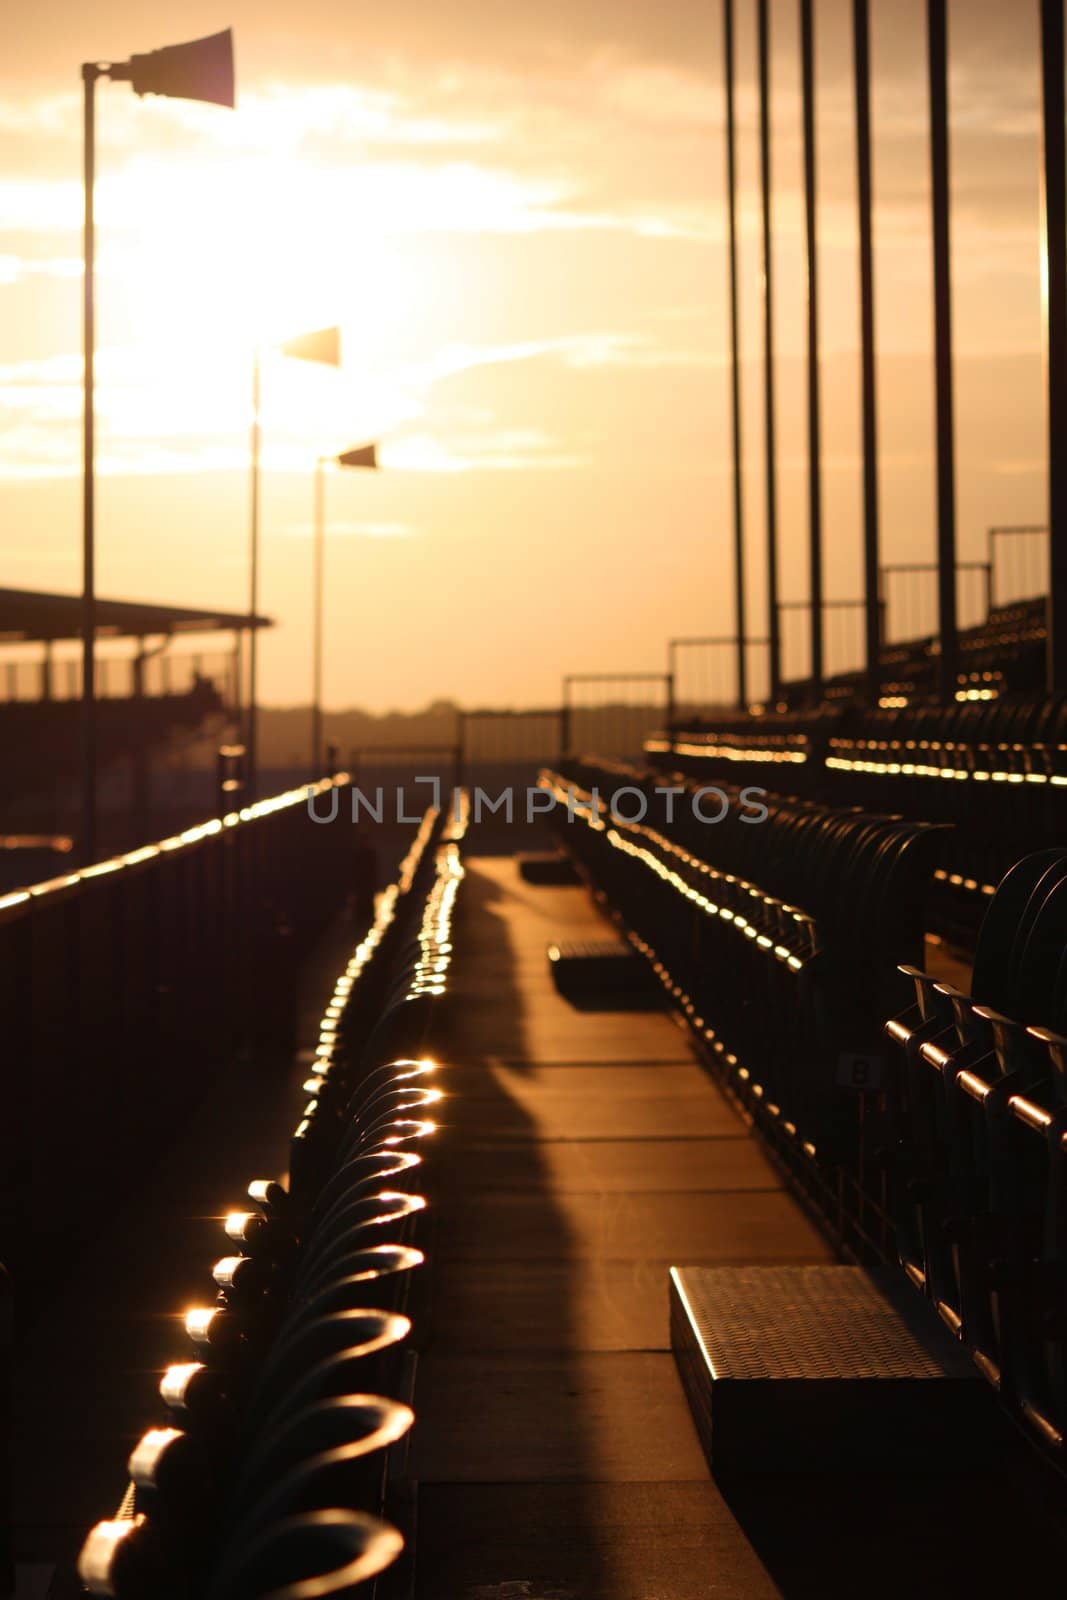 Silverstone race track viewing grandstand seating at dusk